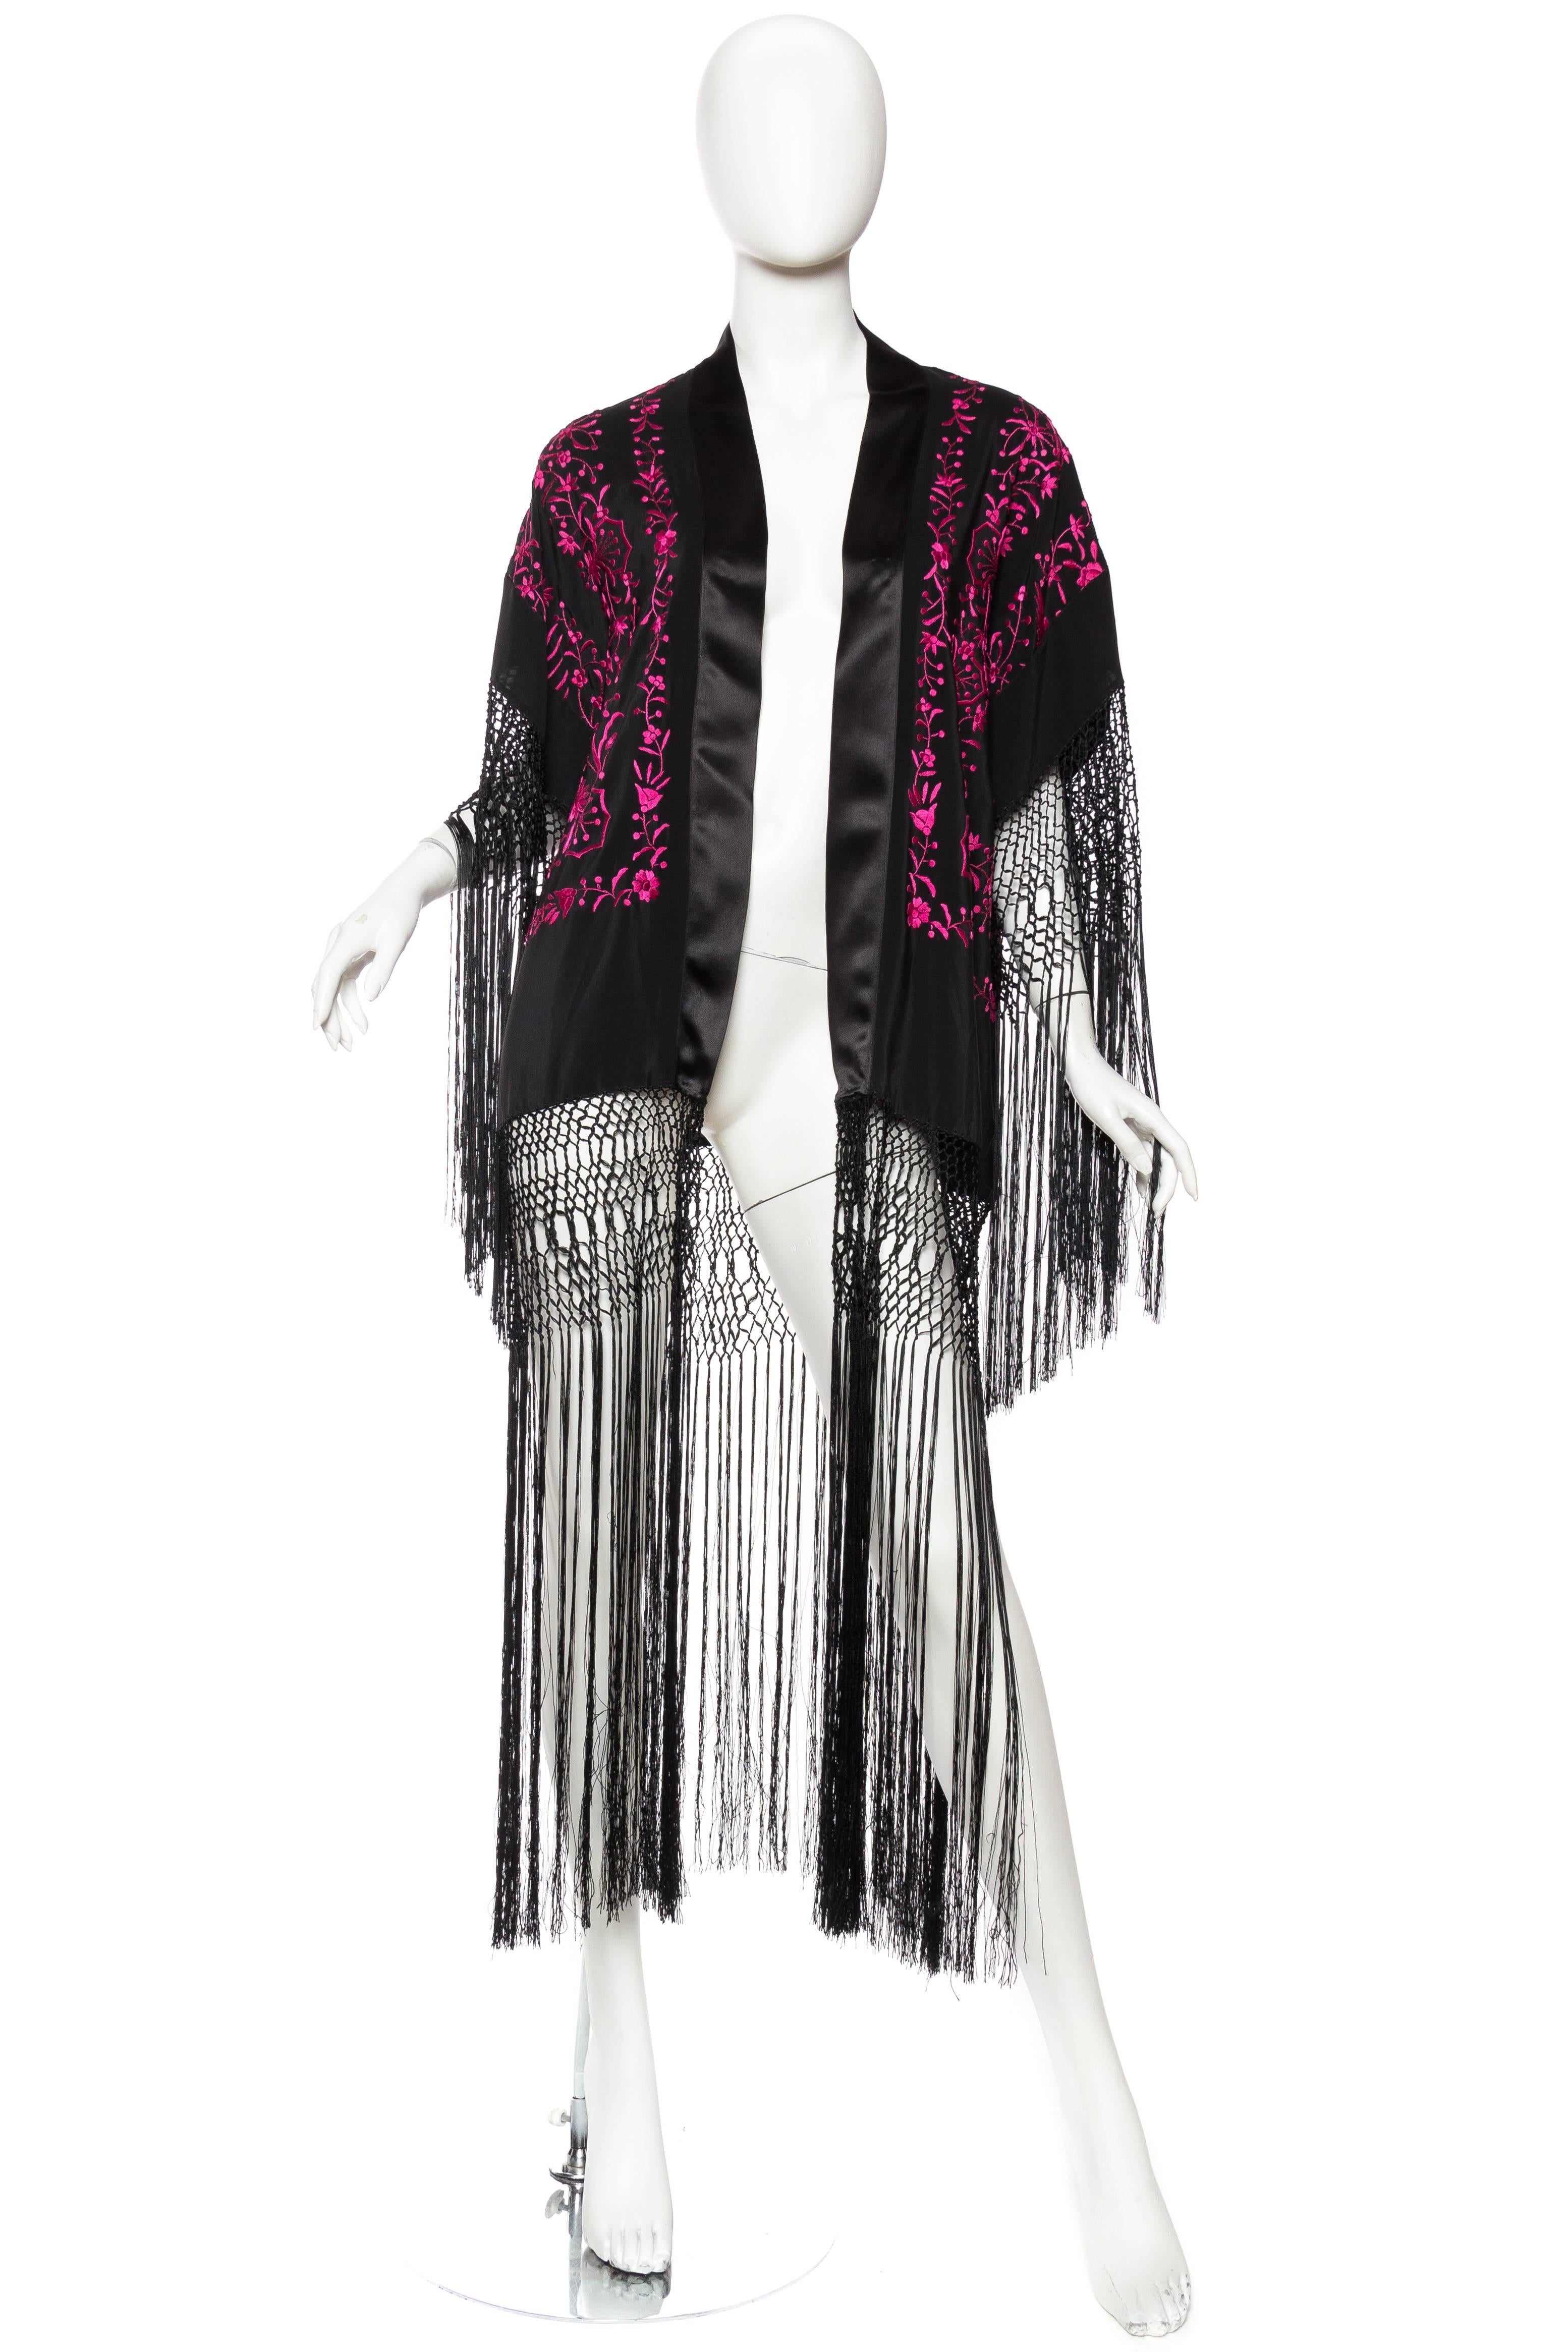 MORPHEW COLLECTION Black & Pink Hand Embroidered Silk Piano Shawl Kimono With Fringe